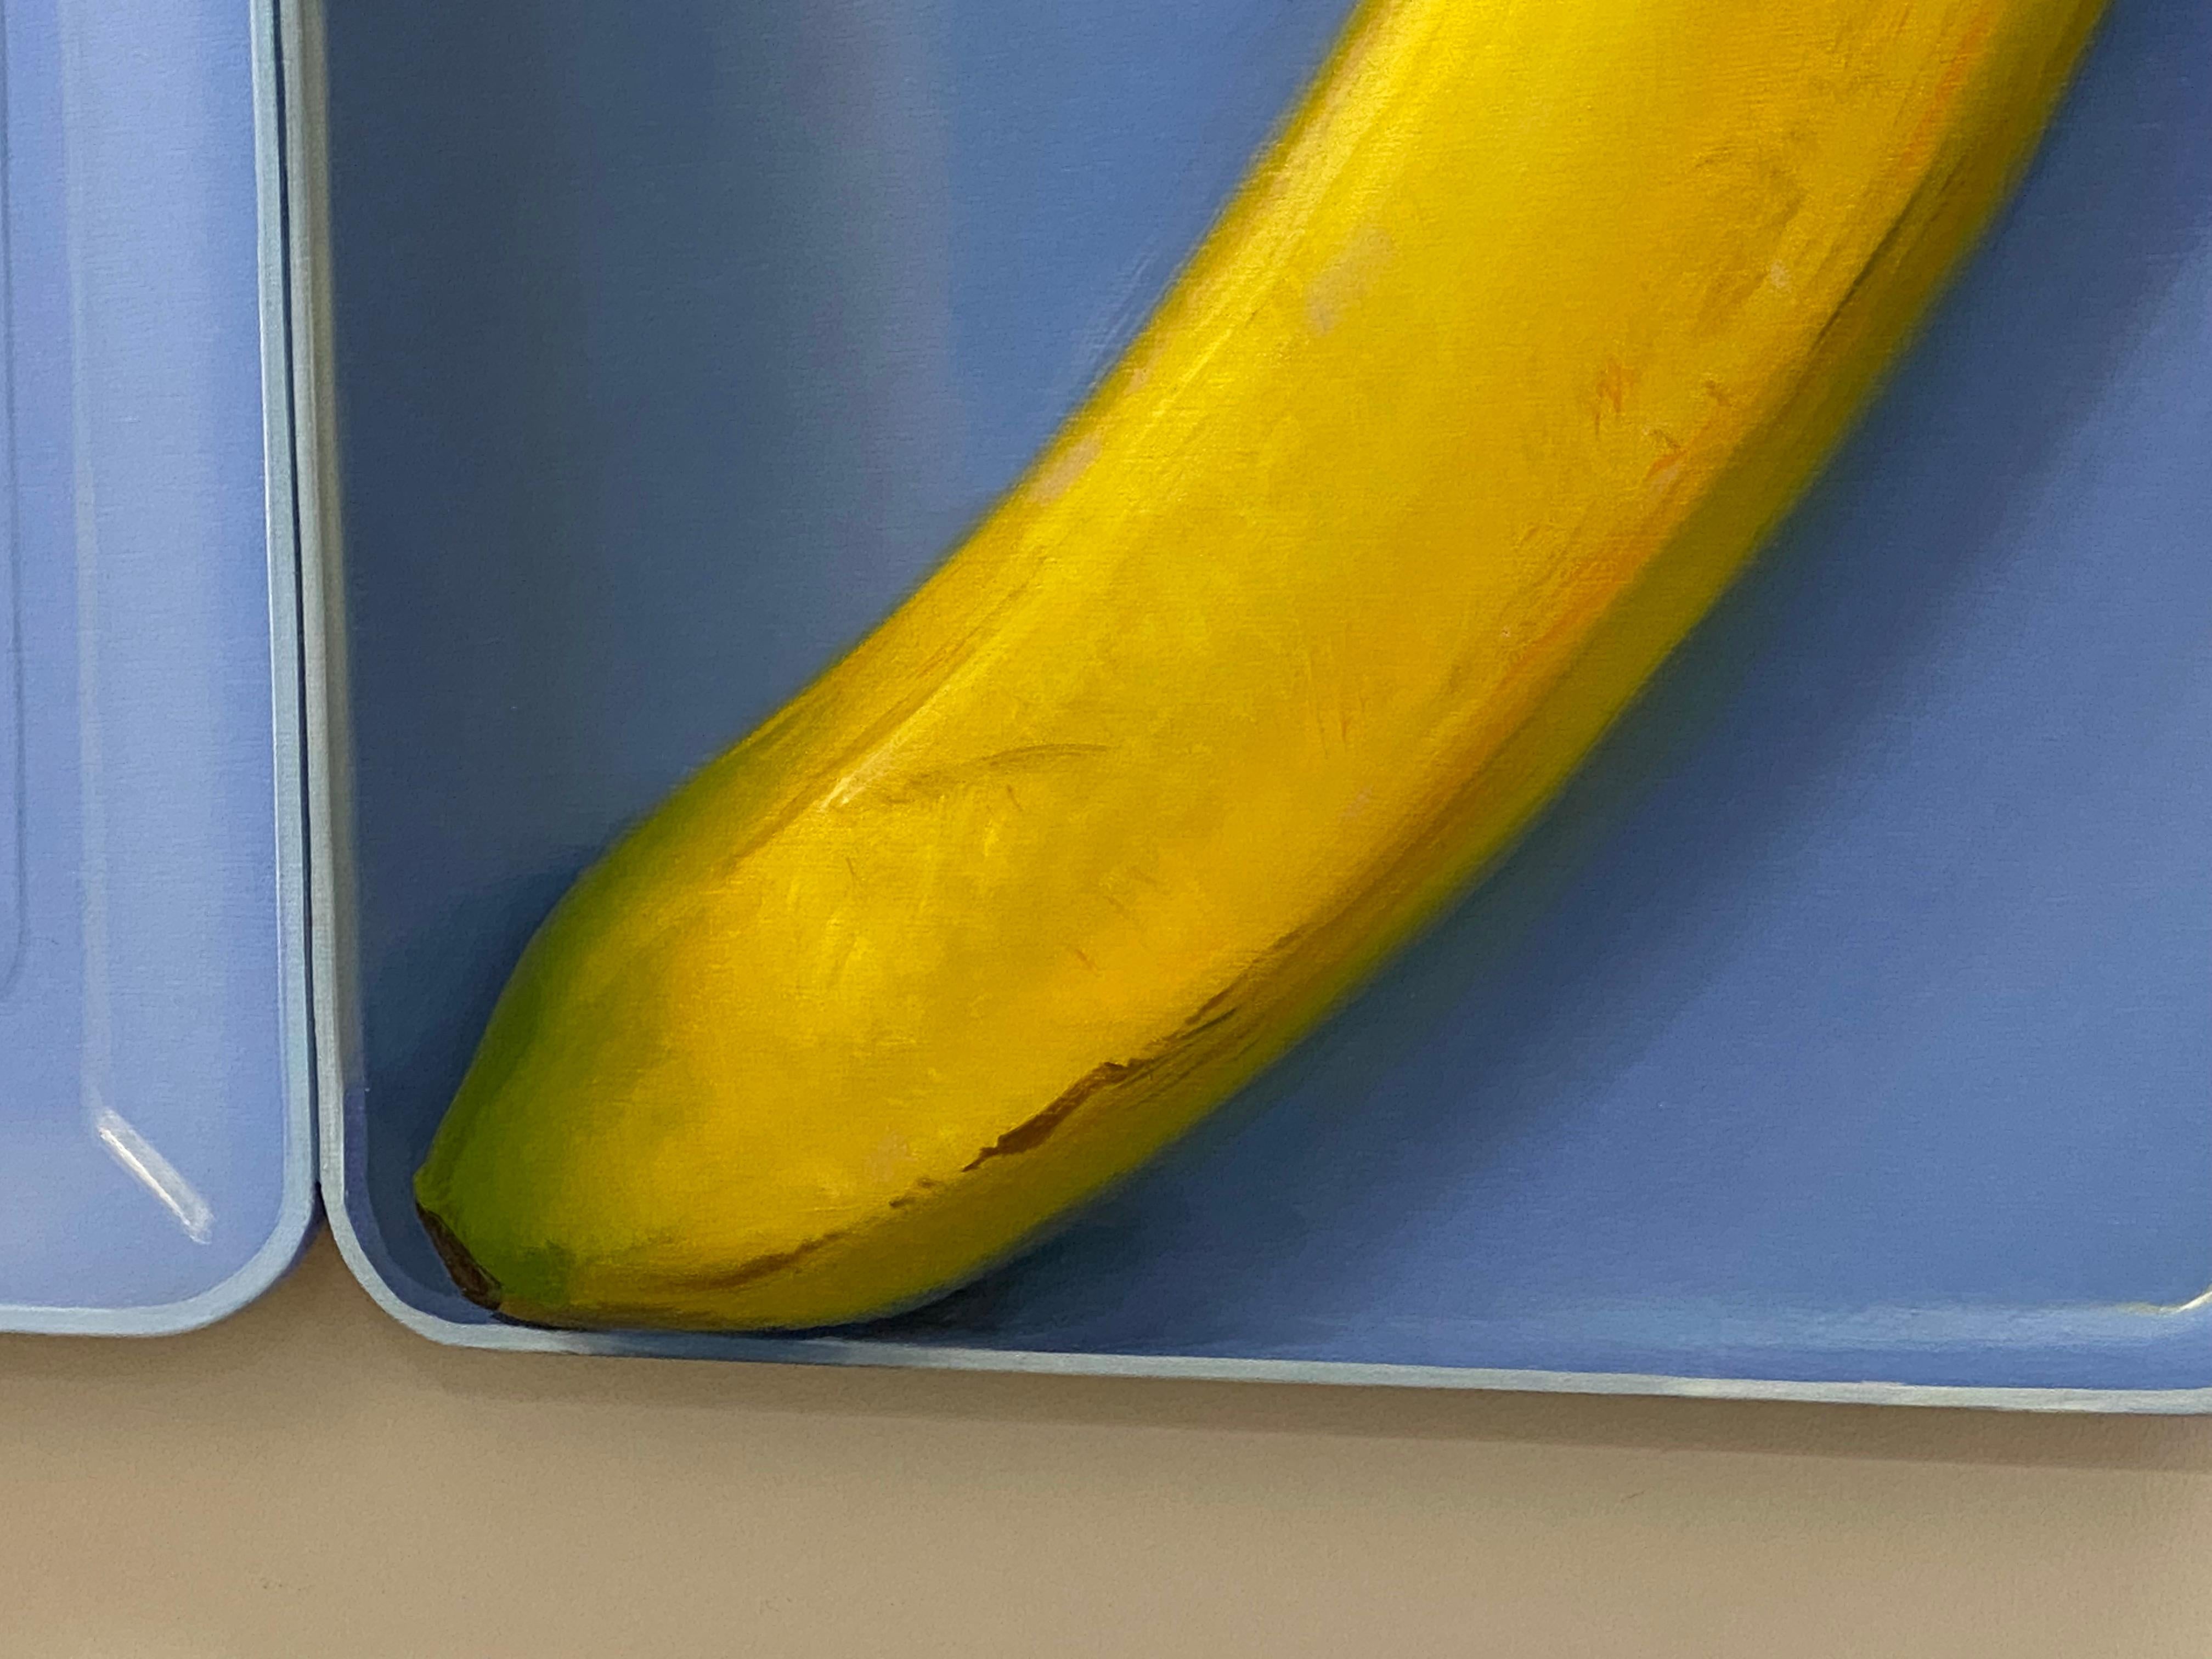 Lunchbox Banana
61 x 89 cm
Oil on wood panel

Rutger Hiemstra is a young Dutch artist who likes to paint objects out of his daily life. 
making the lunchbox ready for his kids he did a banana in a lunchbox, his first thought was: 'That would be a